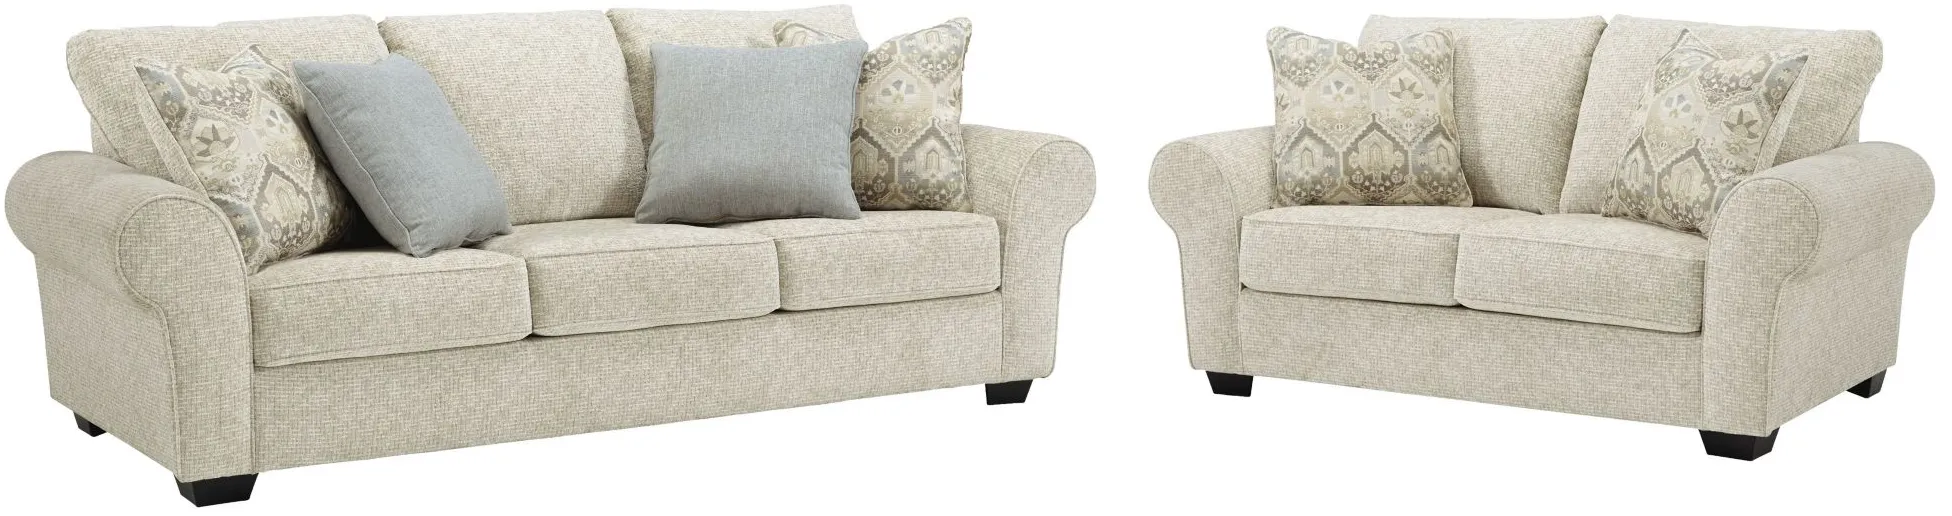 Haisley 2-pc.. Sofa and Loveseat Set in Ivory by Ashley Furniture